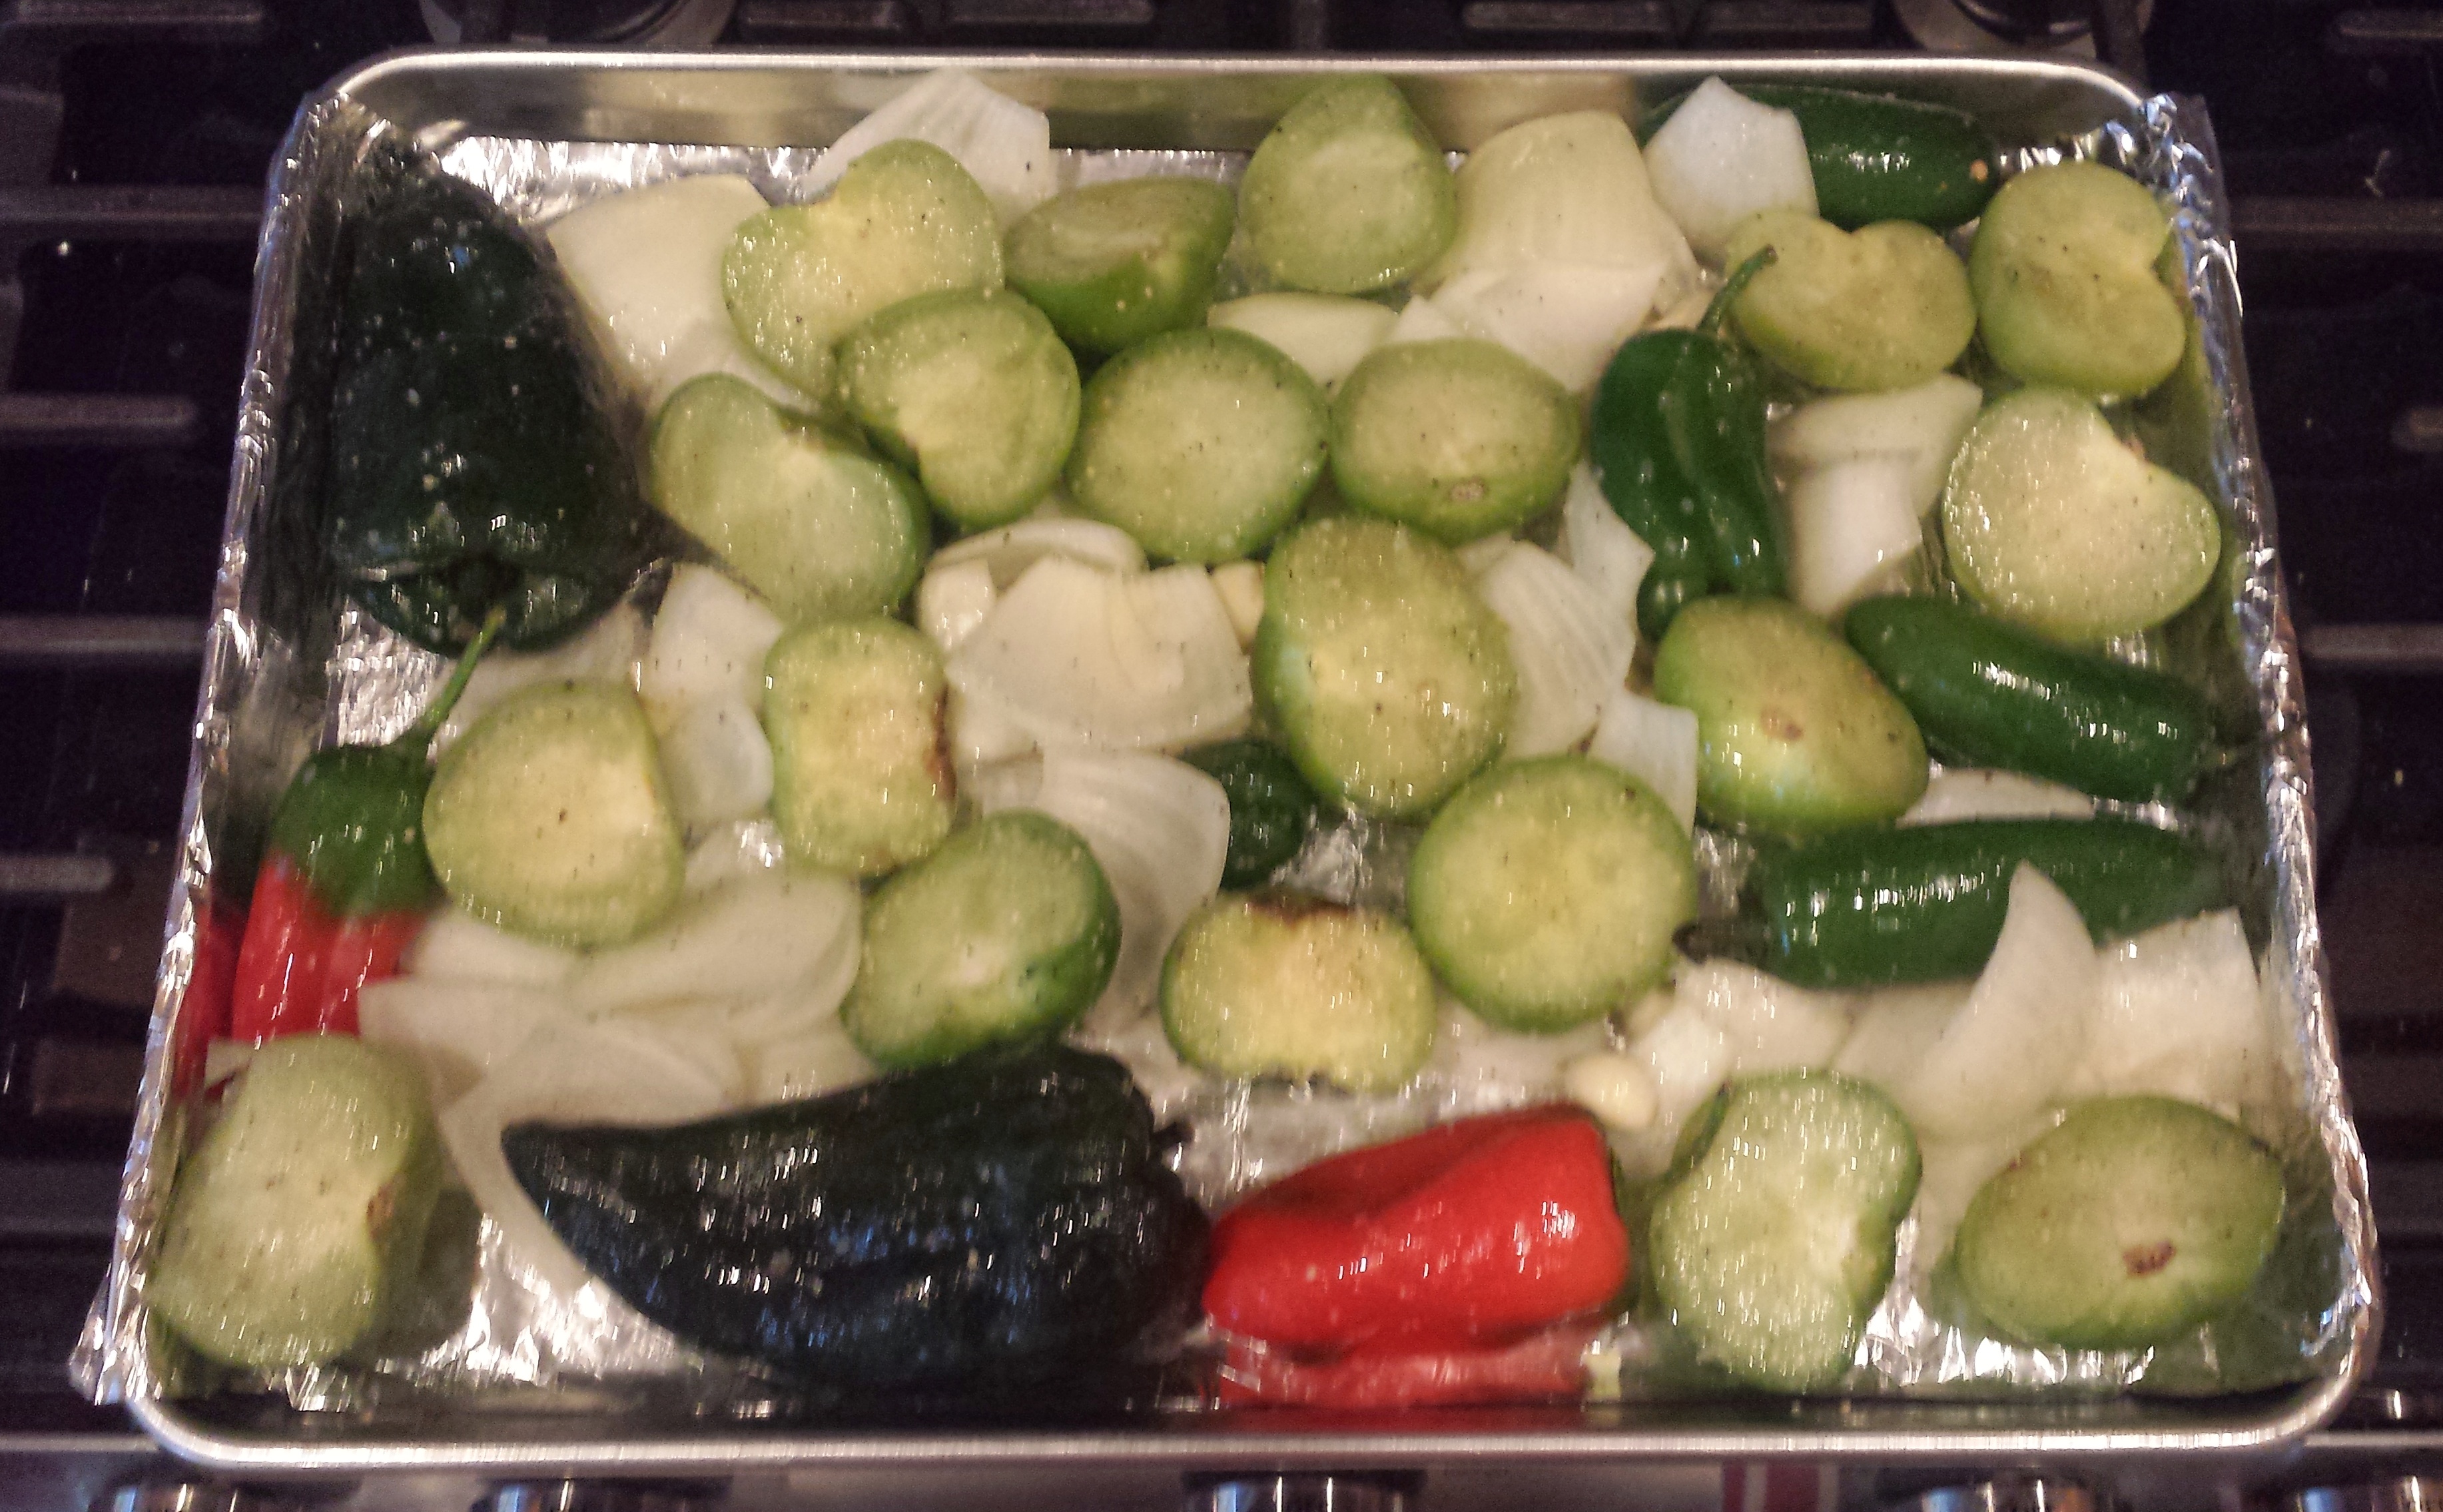 Tomatillos, jalapenos, poblanos, bell peppers, onions and garlic before being roasted.